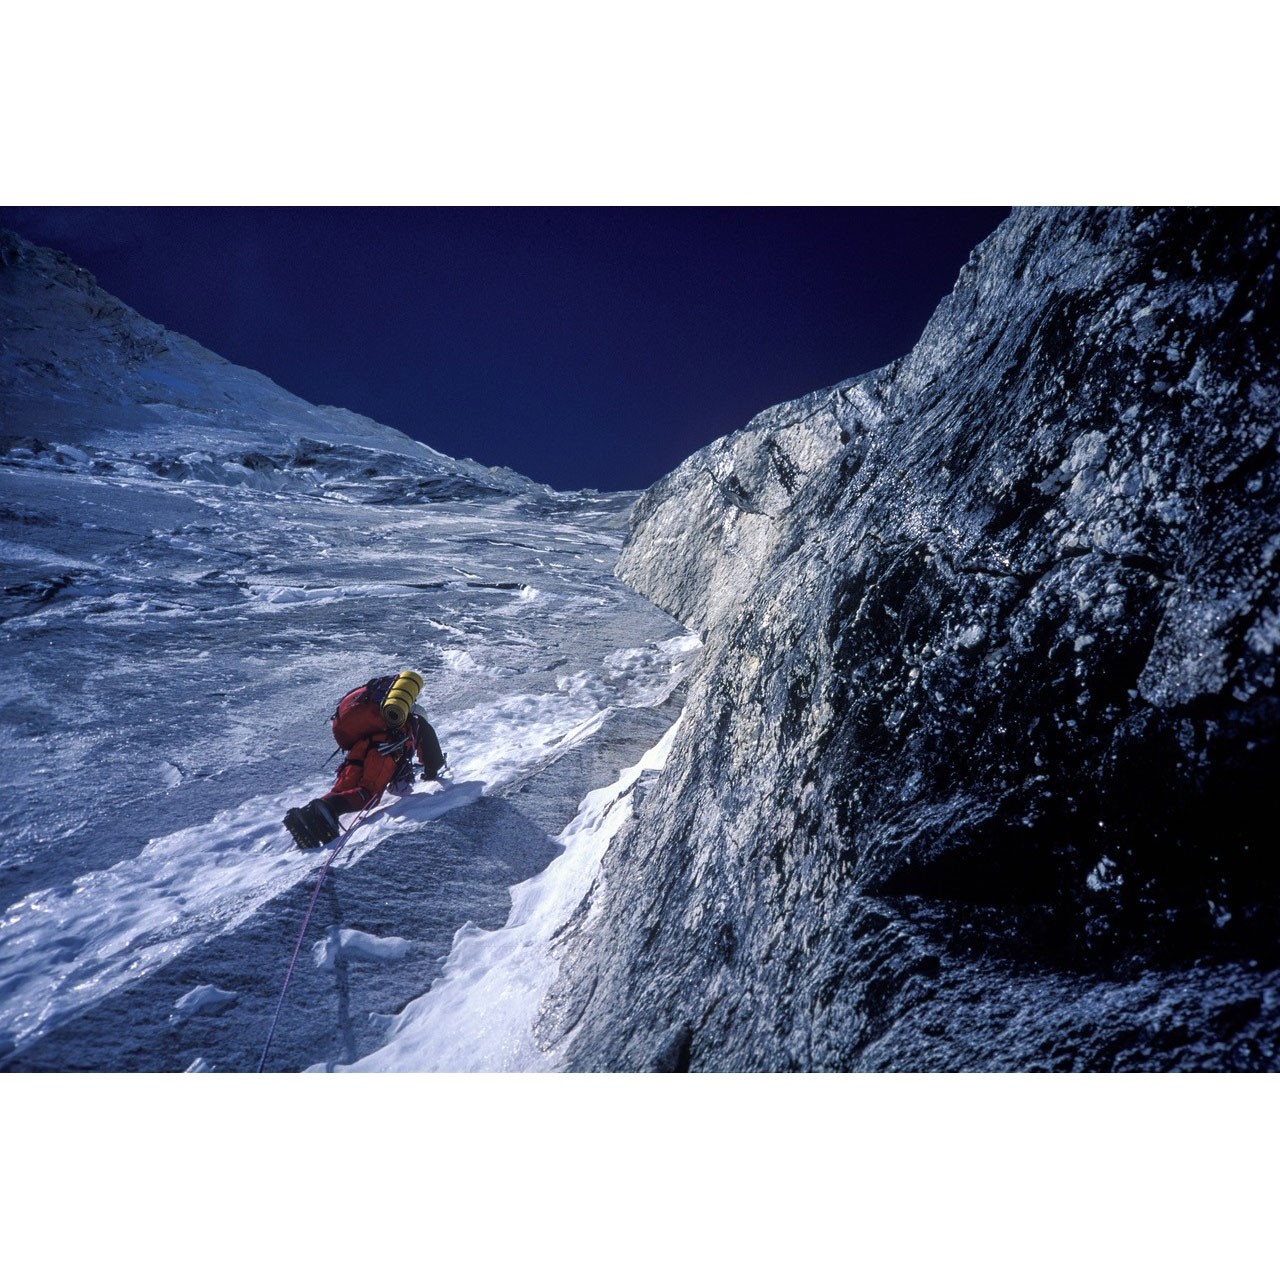 No Shortcuts to the Summit: Extreme Alpine Adventure - Andy Cave | Outside Event